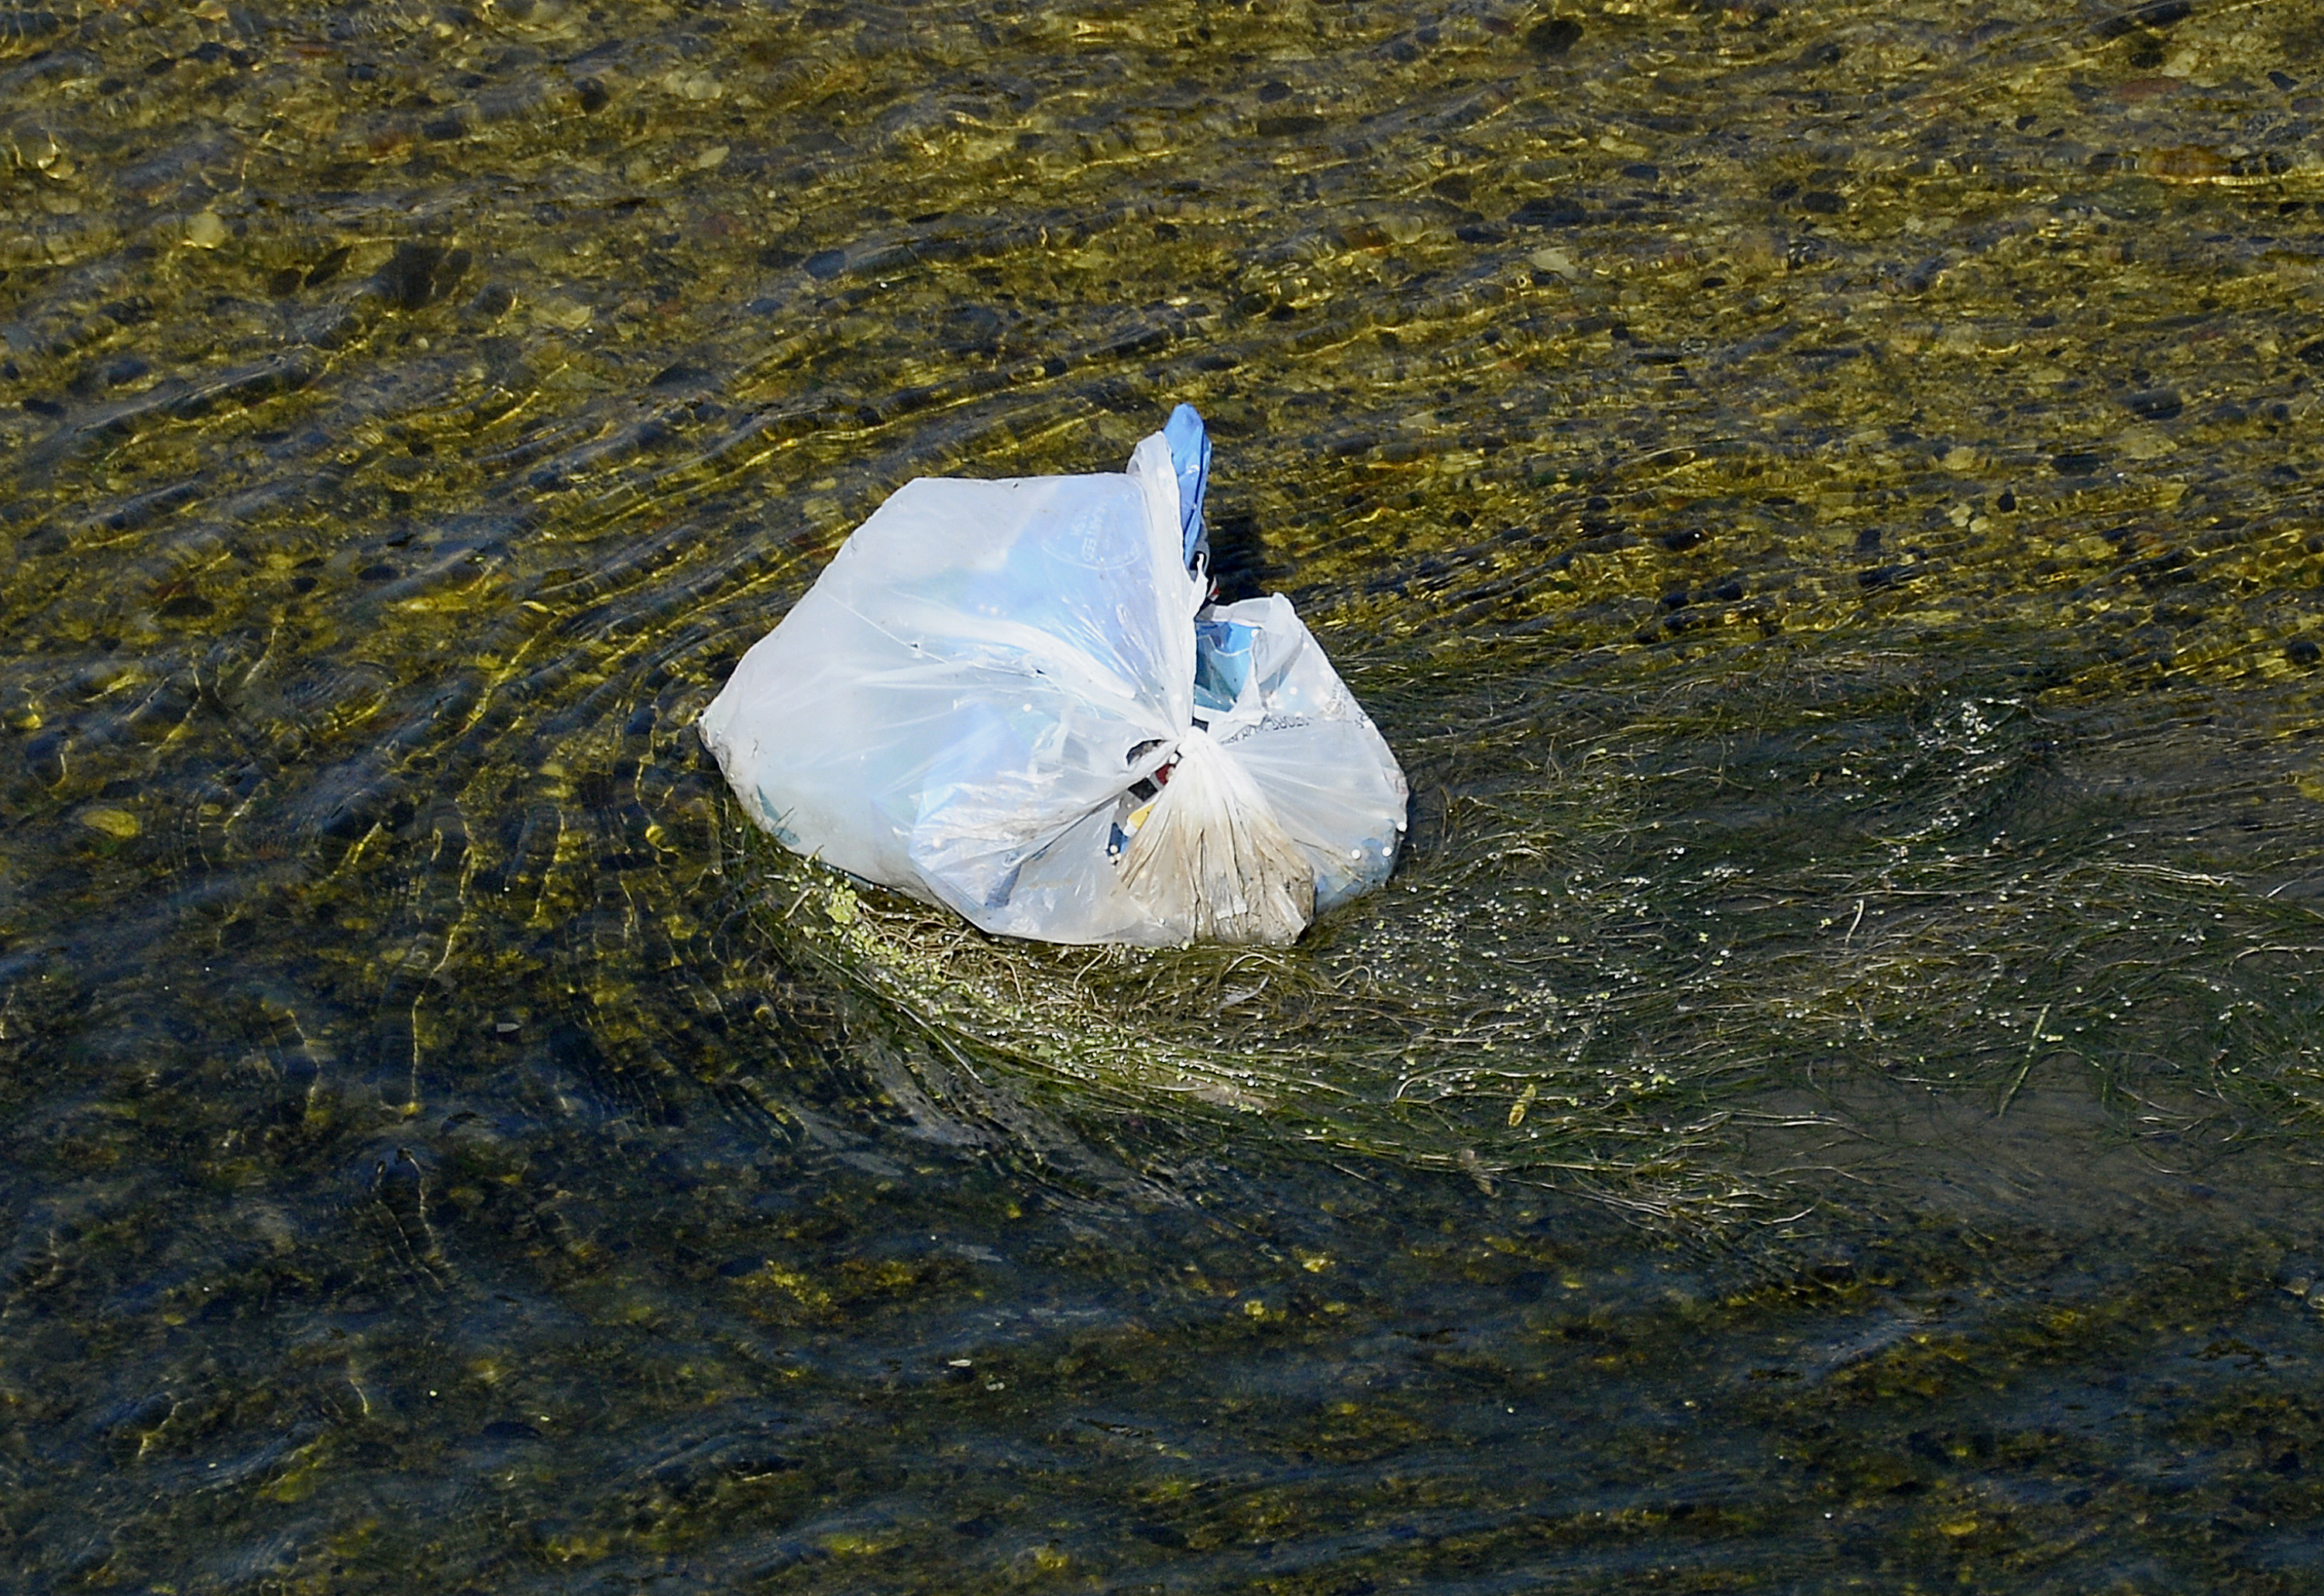 A single-use plastic bag floats along the Los Angeles River in Los Angeles, California, U.S., on Tuesday, June 24, 2014. California grocers, who could realize $1 billion in new revenue from selling paper bags for a dime each, teamed up with environmentalists on a new push to make California the first state to ban plastic shopping bags. The retail and environmental lobbies, which backed many of 13 failed California bills since 2007 to curb or ban single-use plastic shopping bags, lost the face off against manufacturers of both plastic and paper bags who oppose restrictions on the sacks. (Bloomberg—Bloomberg via Getty Images)